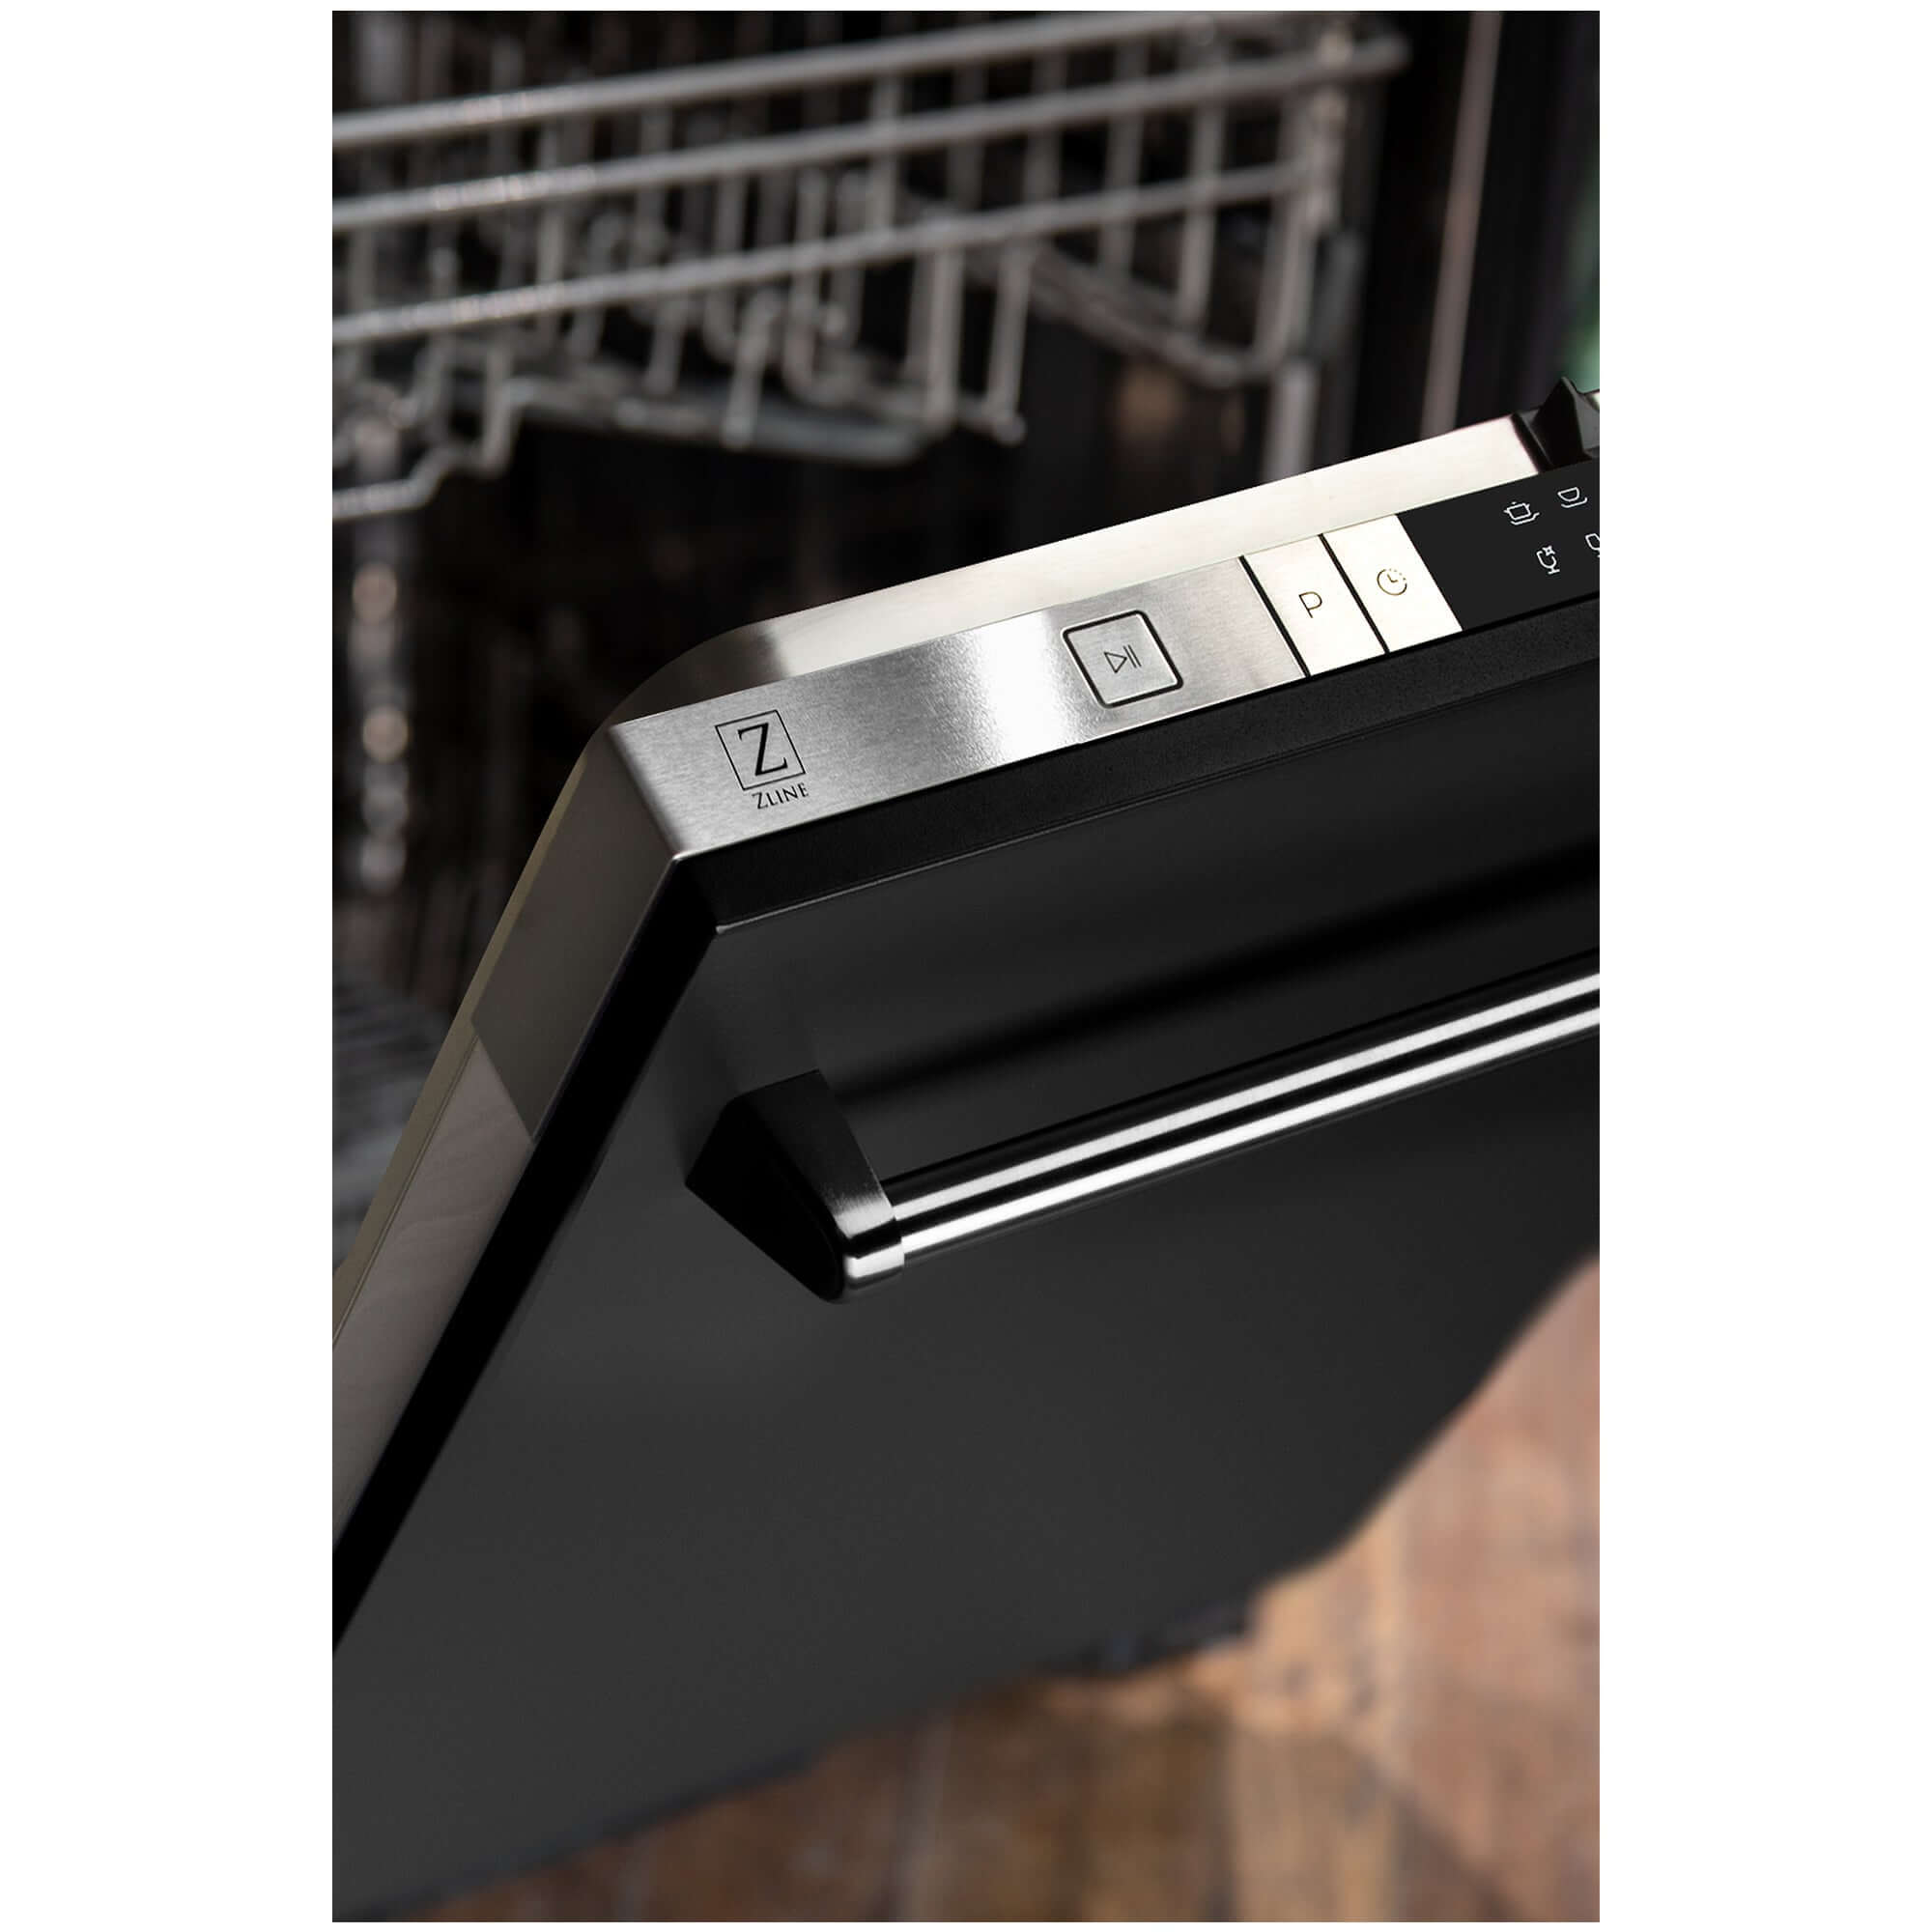 ZLINE 24 in. Black Matte Top Control Built-In Dishwasher with Stainless Steel Tub and Traditional Style Handle, 52dBa (DW-BLM-24) built-in to cabinets in a luxury kitchen.